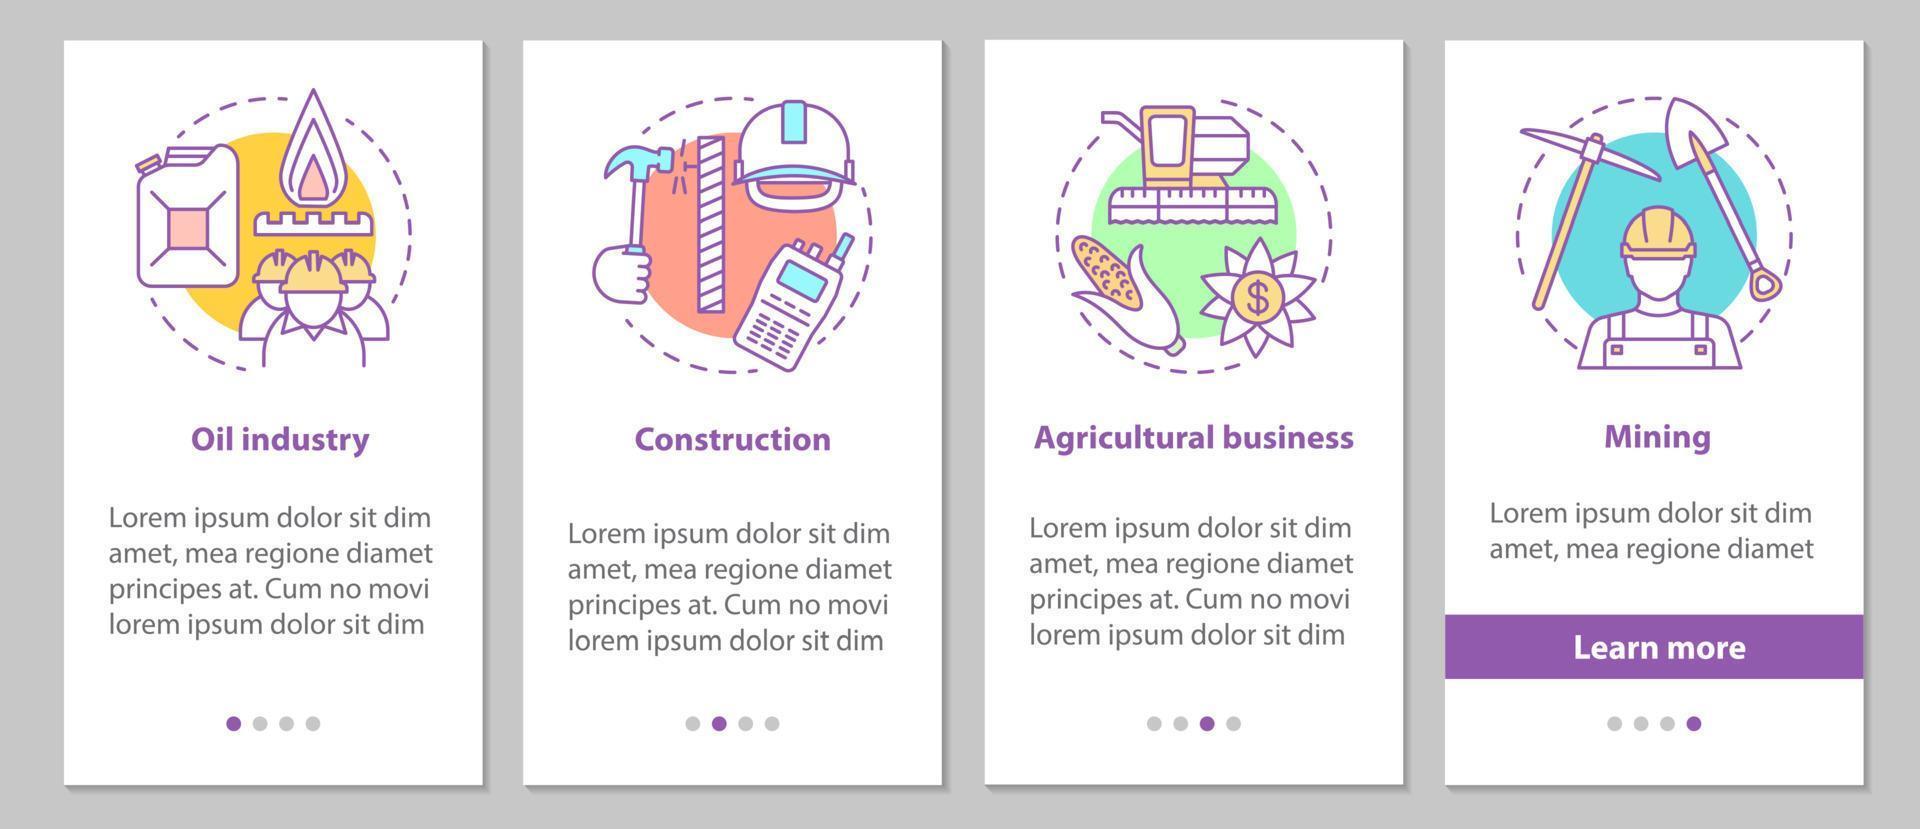 Industries onboarding mobile app page screen with linear concepts. Oil industry, construction, agricultural business, mining steps graphic instructions. UX, UI, GUI vector template with illustrations